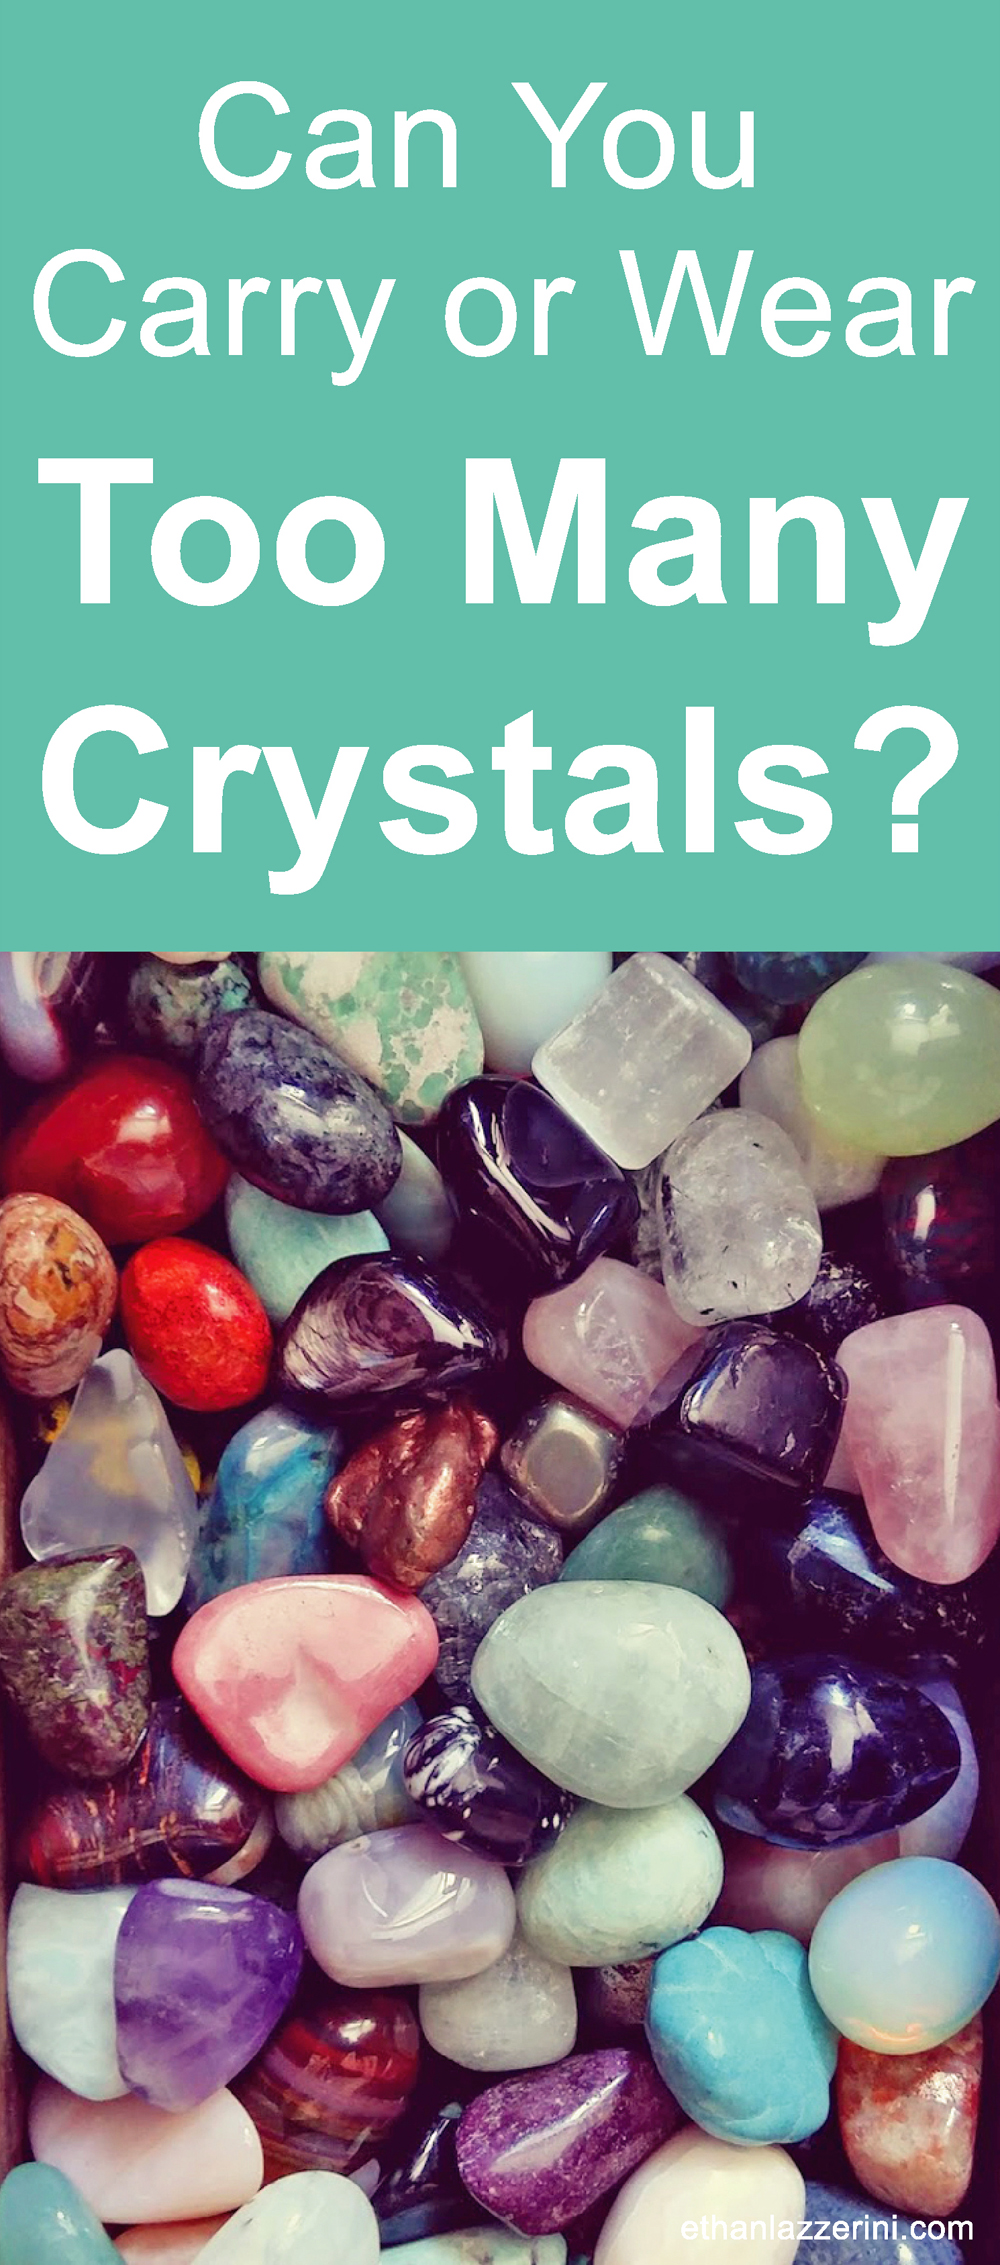 Can You carry or wear too many crystals?